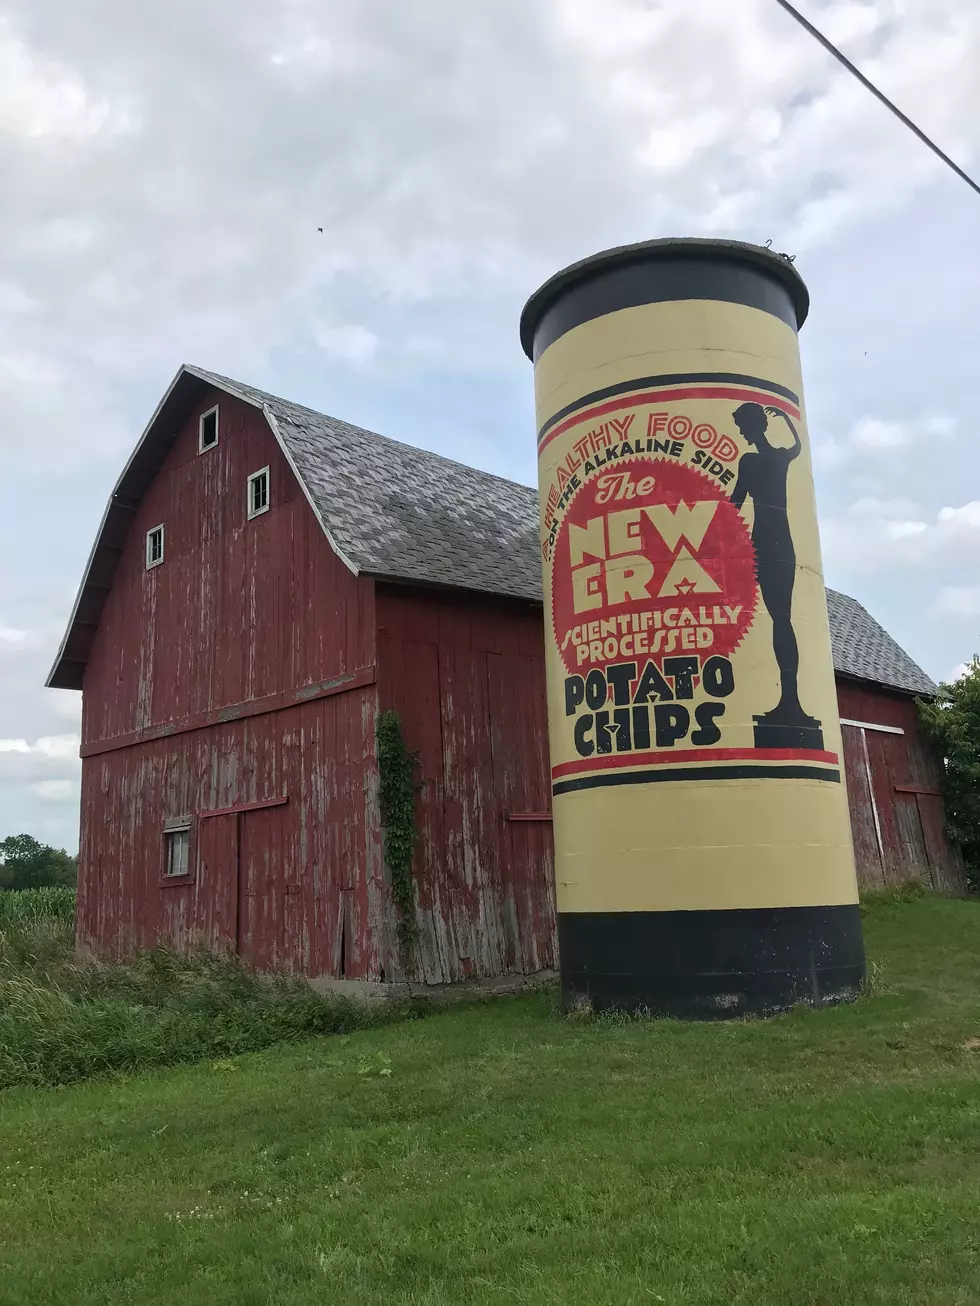 Why Is There A Giant Potato Chip Cannister in Portland, MI?